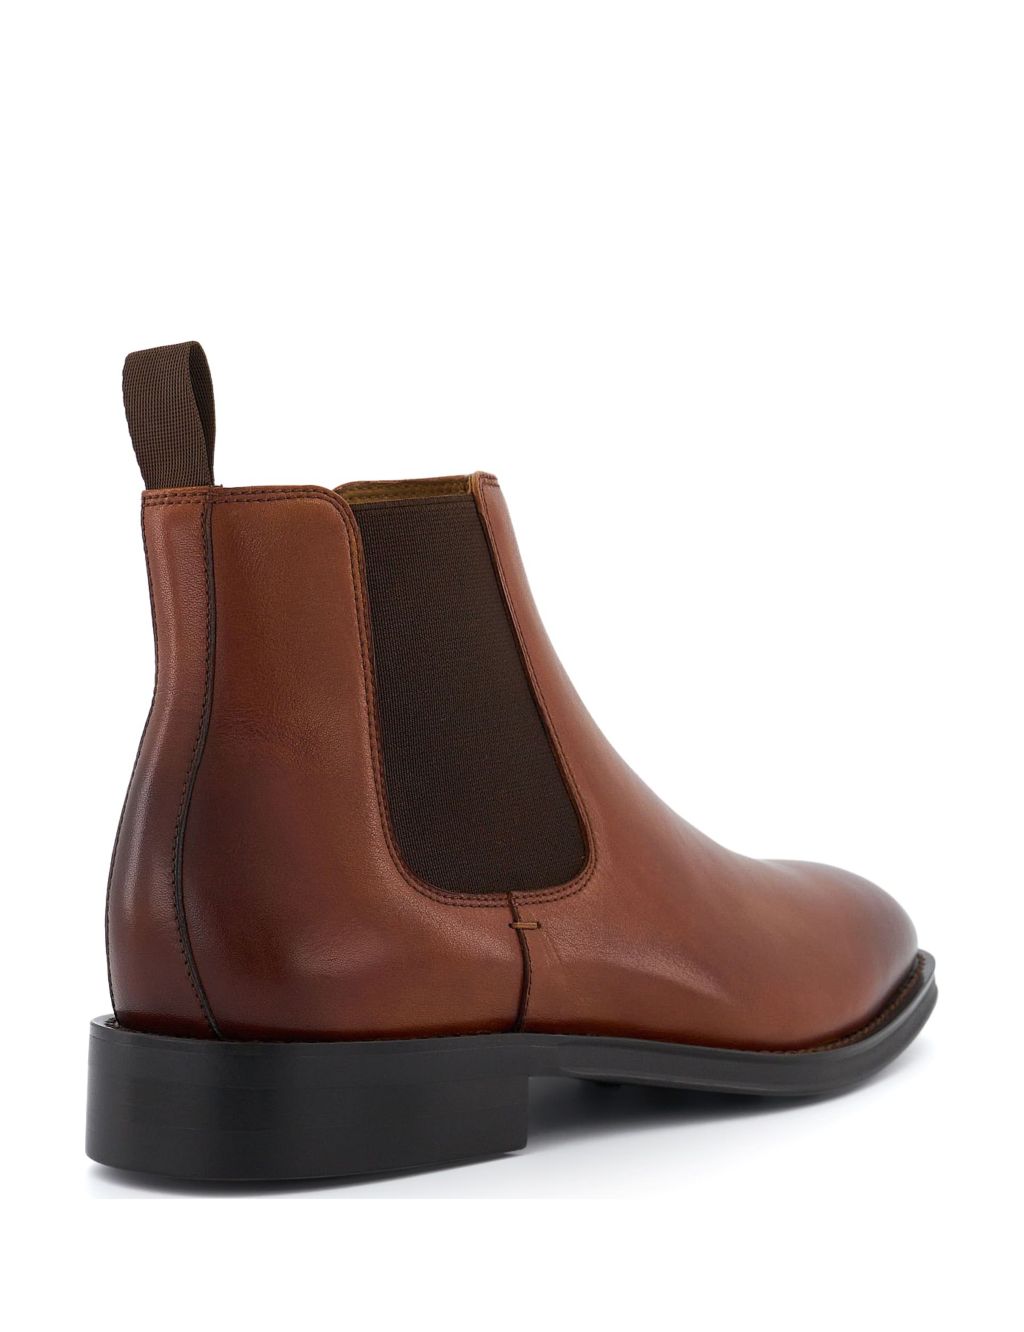 Suede Chelsea Boots image 3